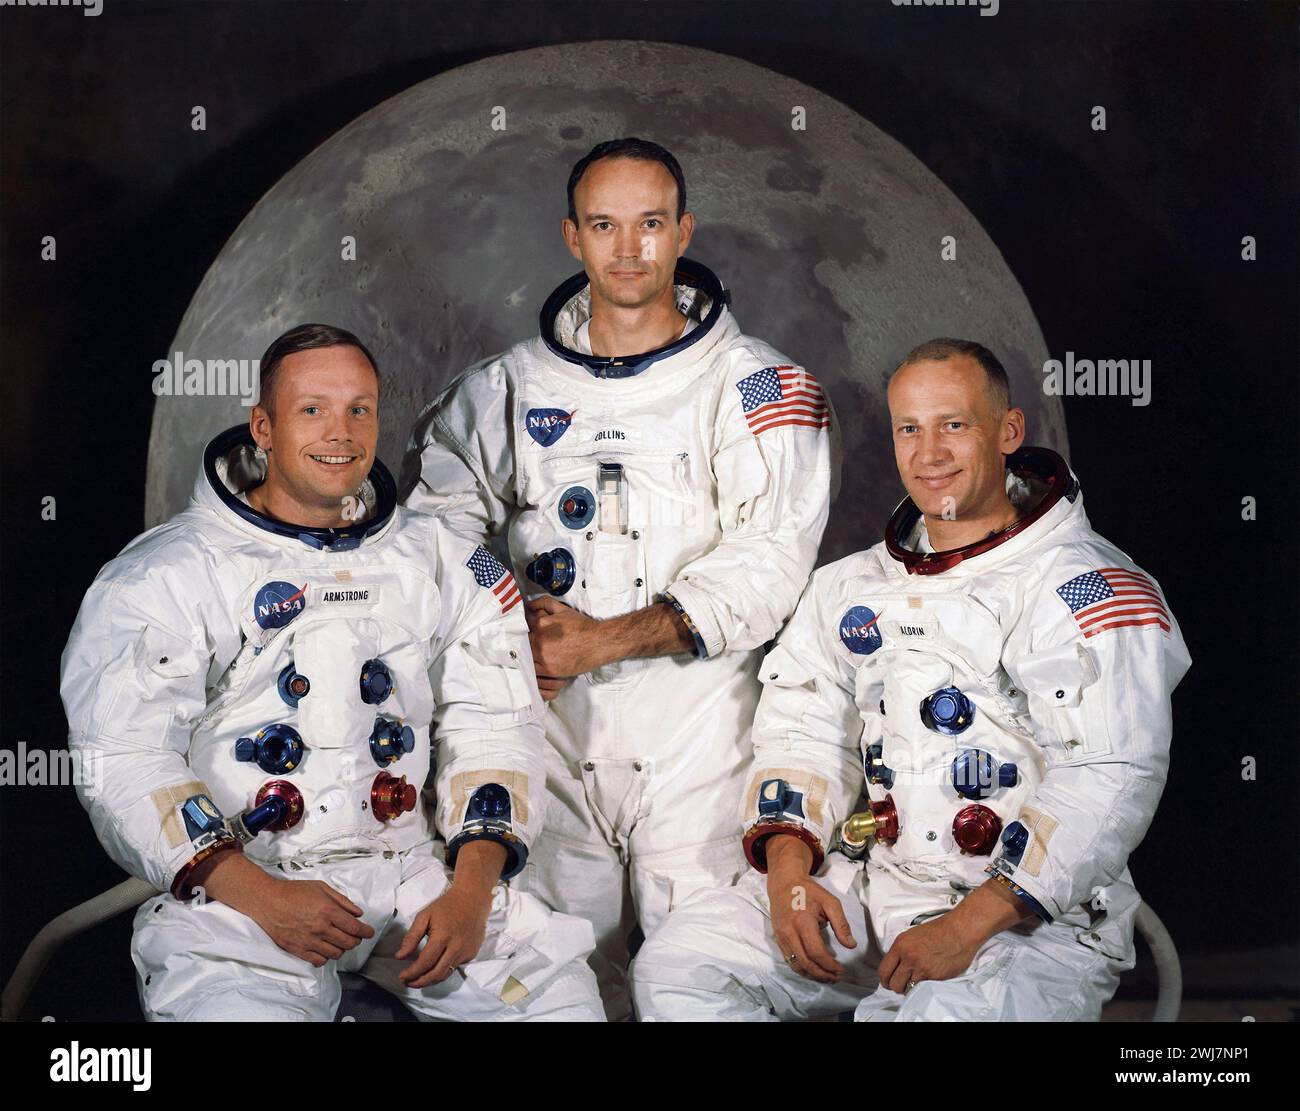 Apollo 11 astronauts. The crew of Apollo 11, the first spaceflight to land men on the moon on July 20th 1969. From left to right, Neil Armstrong, Michael Collins and Buzz Aldrin. Photo courtesy of NASA, May 1969. Stock Photo